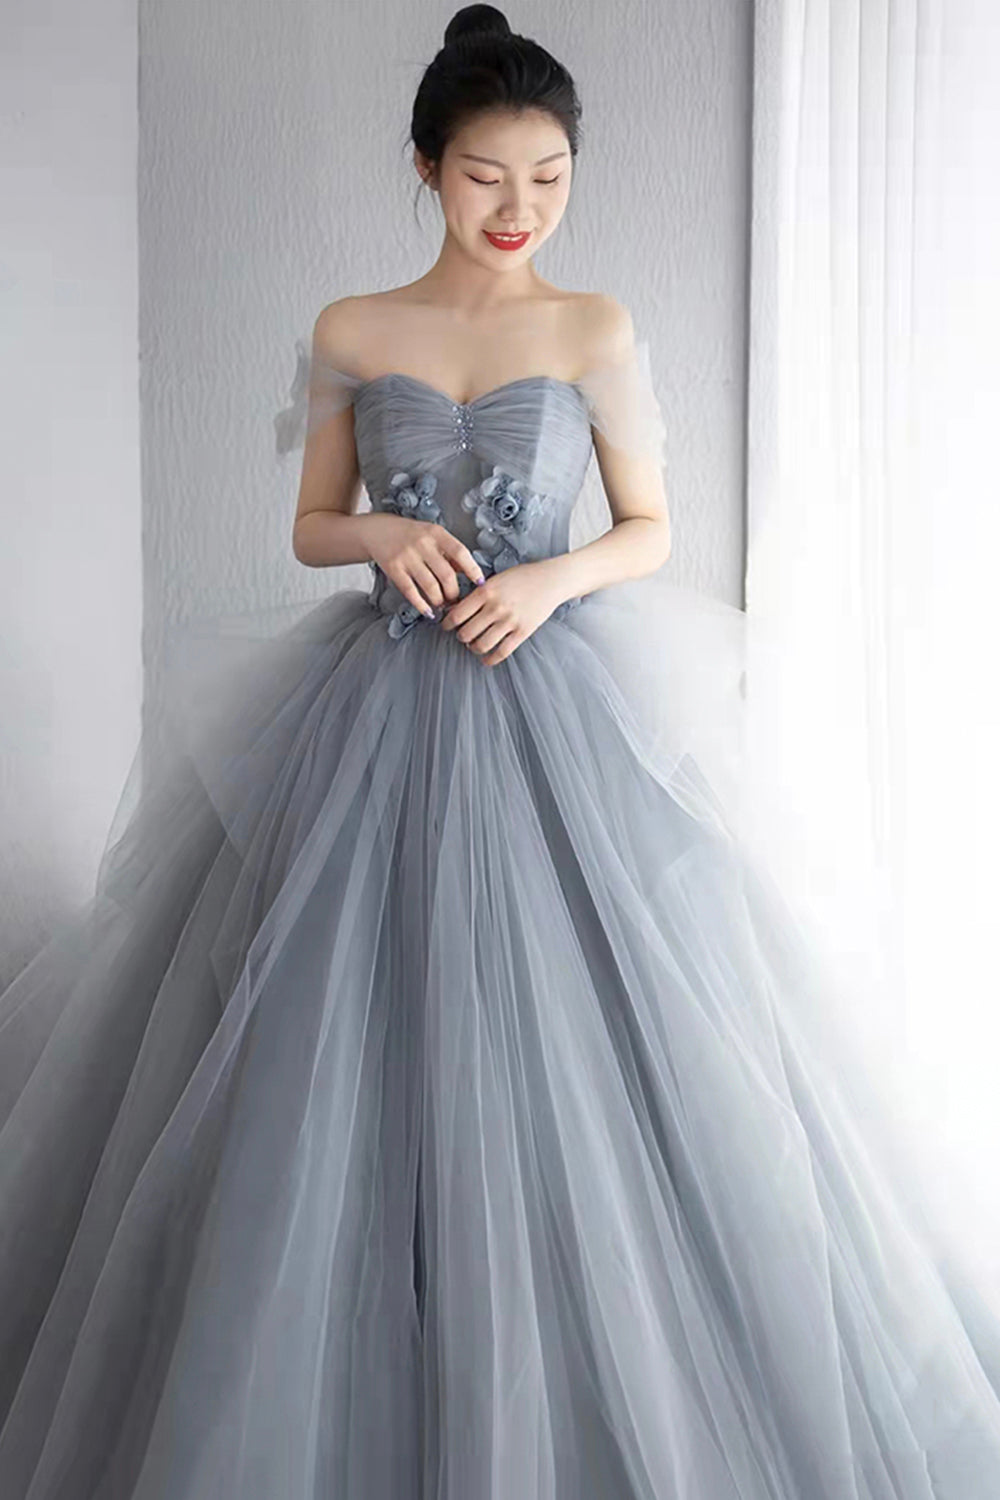 Gray Tulle Layers Long Prom Dress, A-Line Strapless Formal Evening Dress